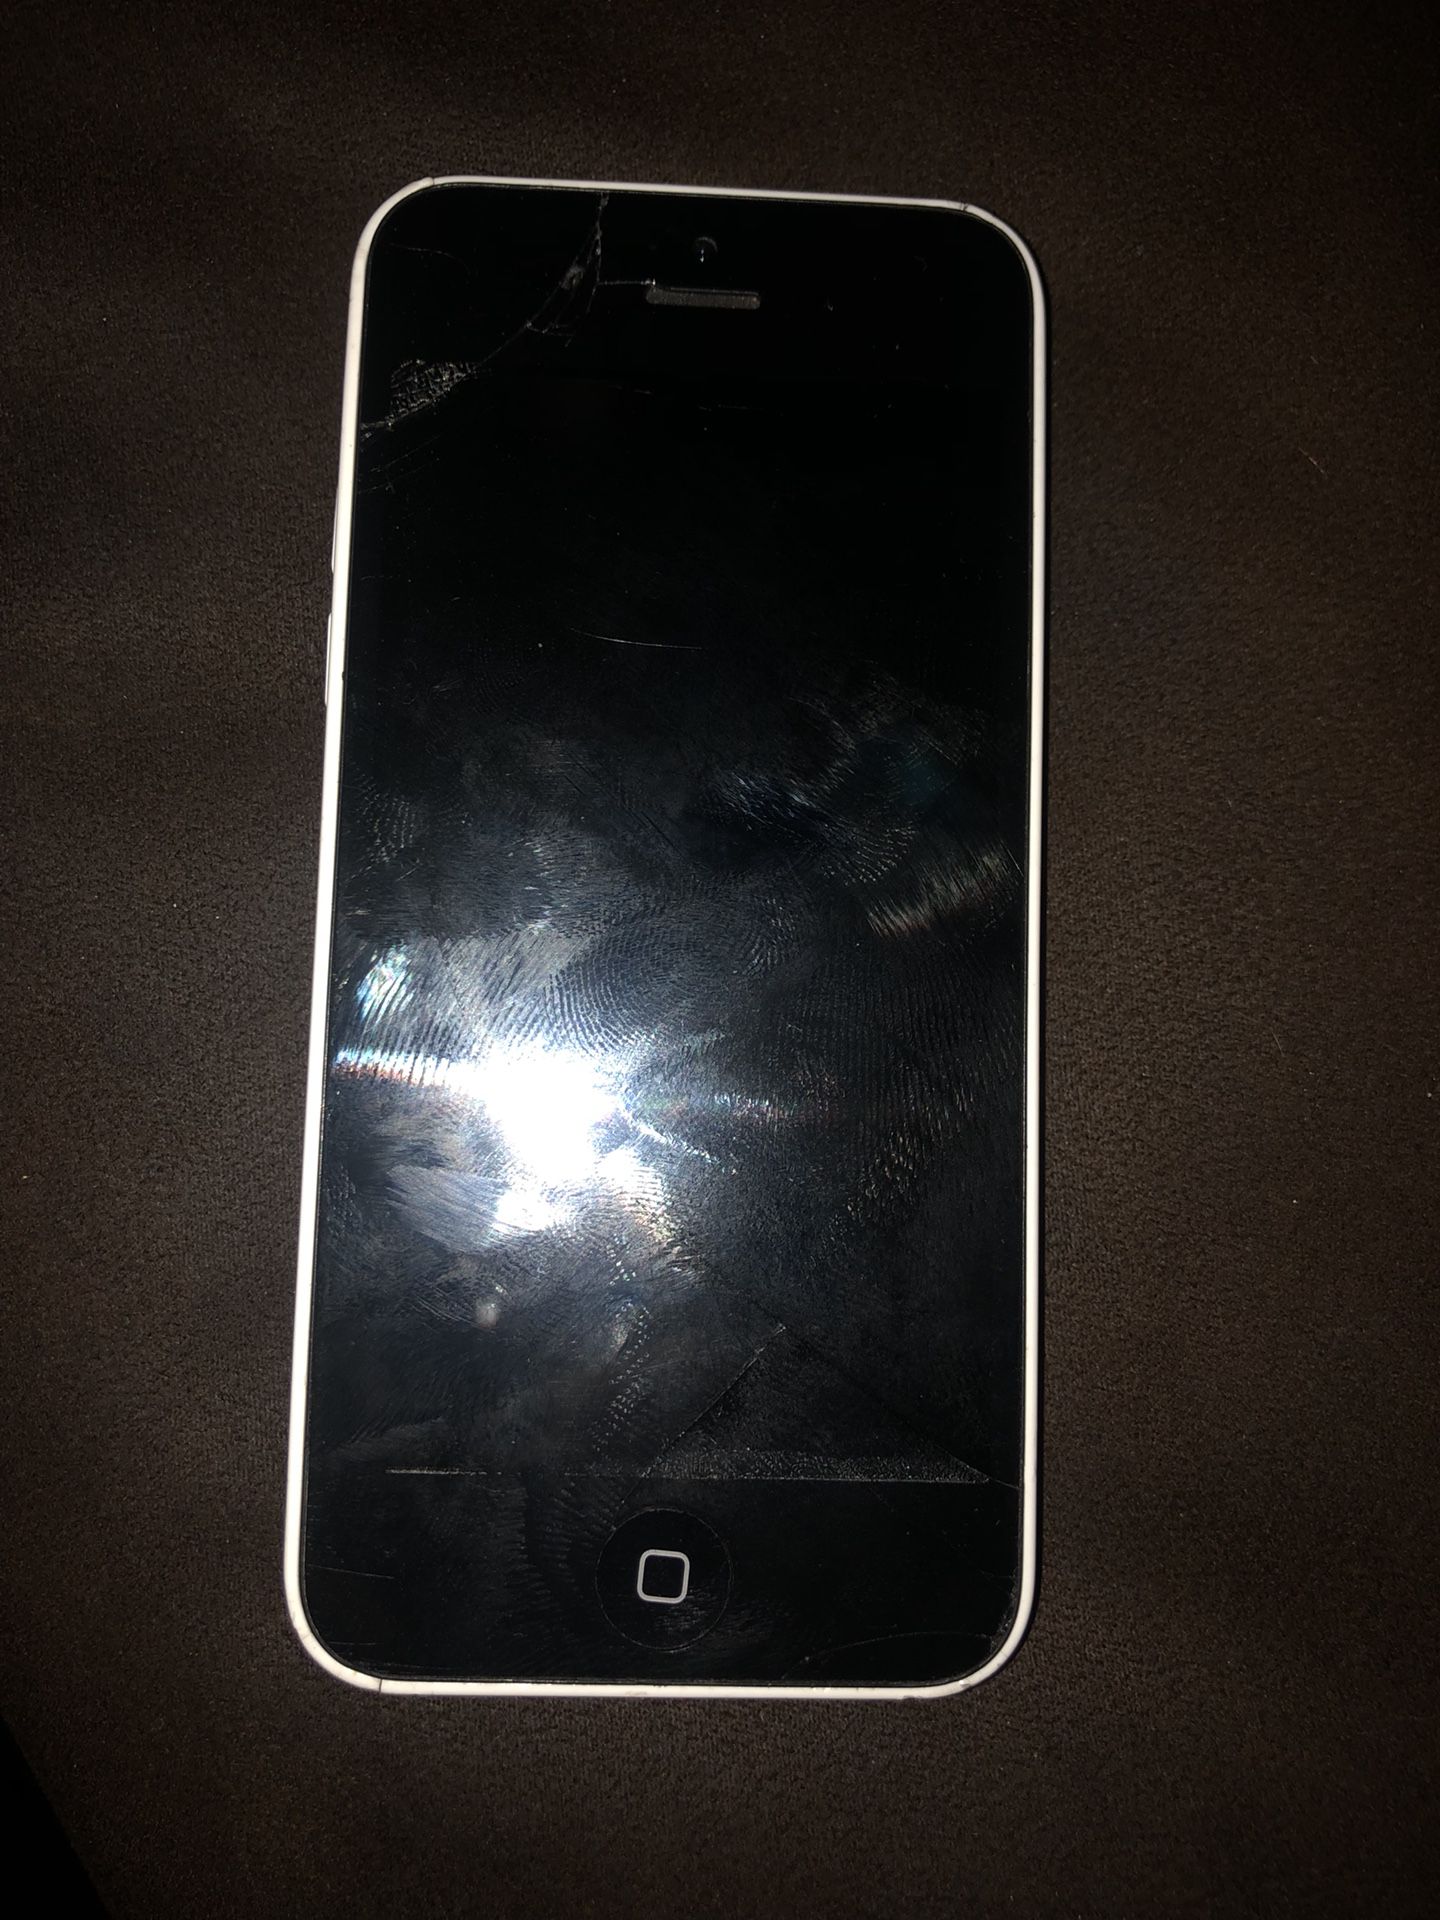 WHITE IPHONE 5C! 35$ now today